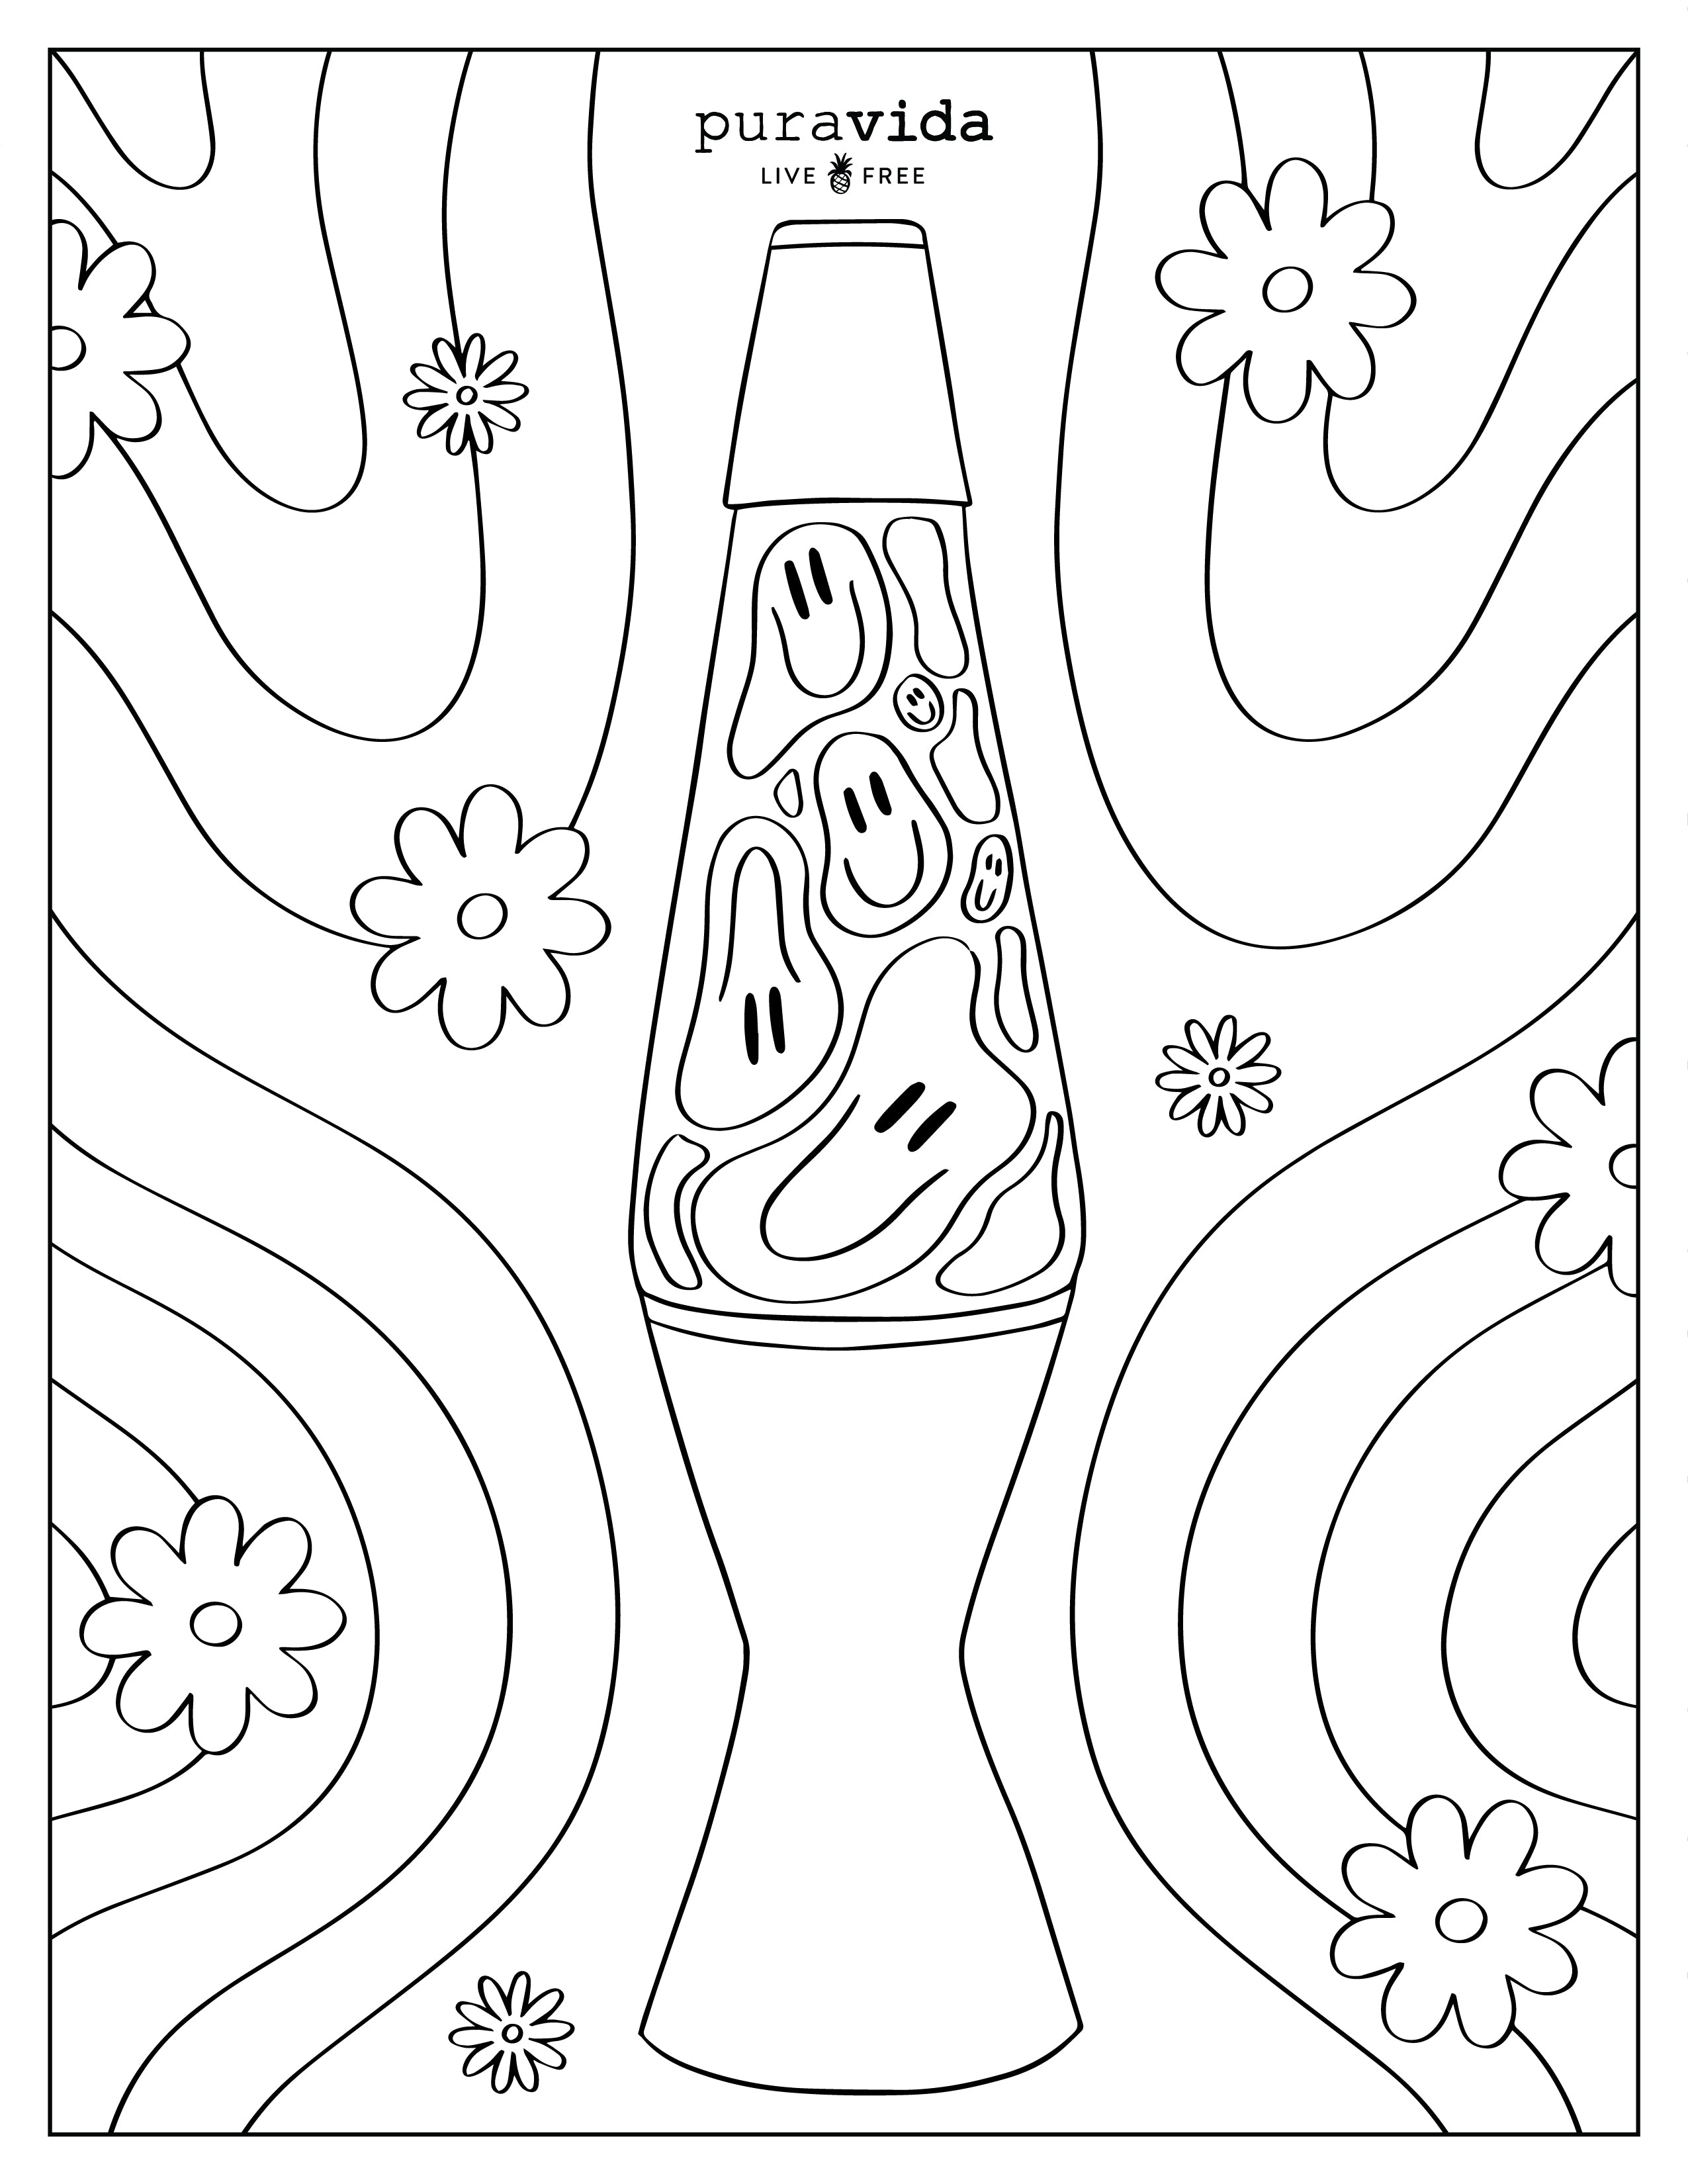 Preppy Colouring Sheets